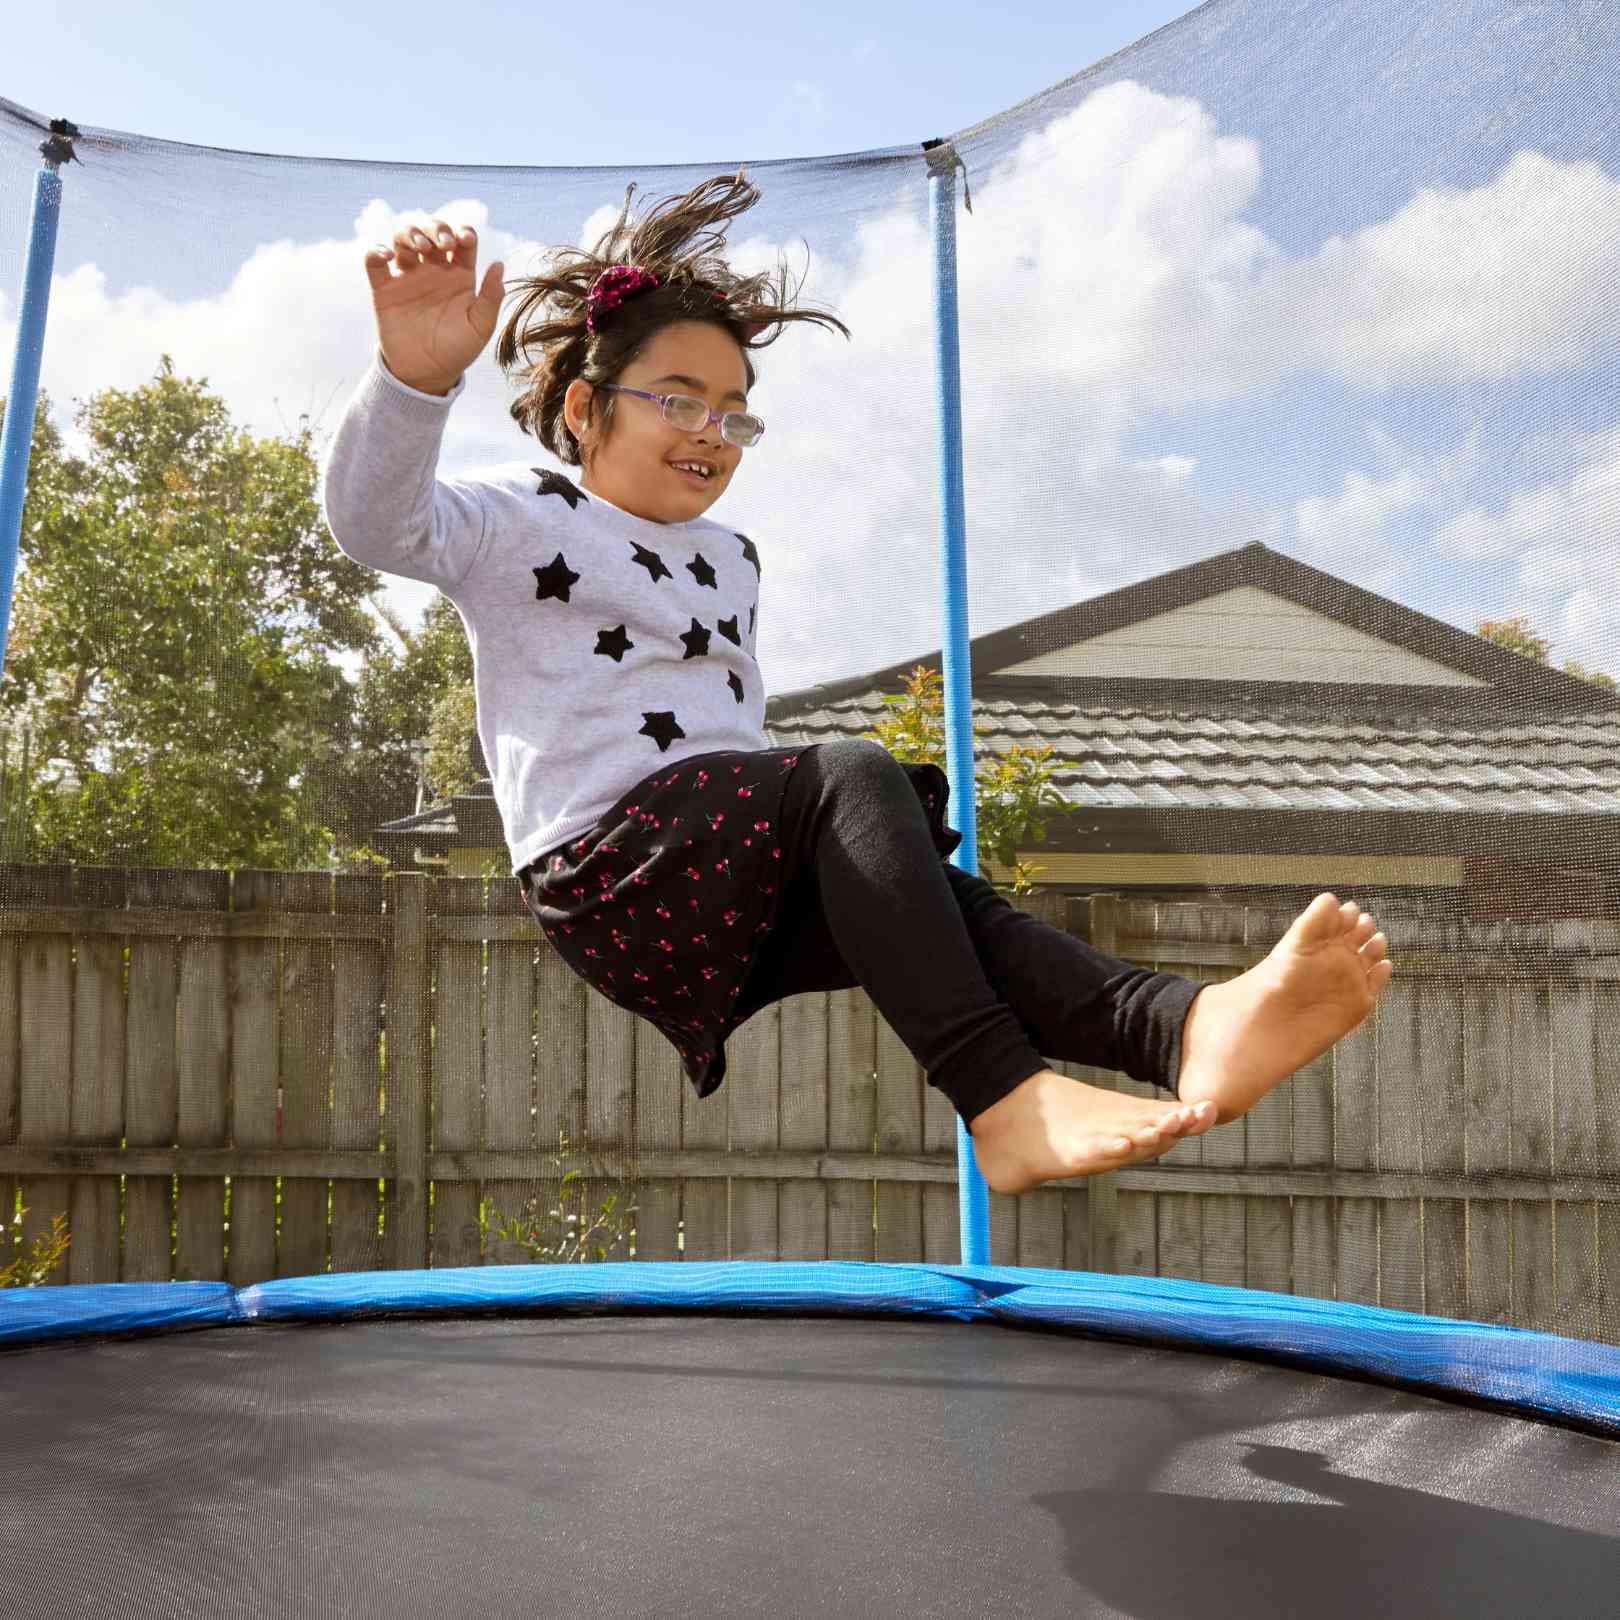 A blind child bouncing on a trampoline